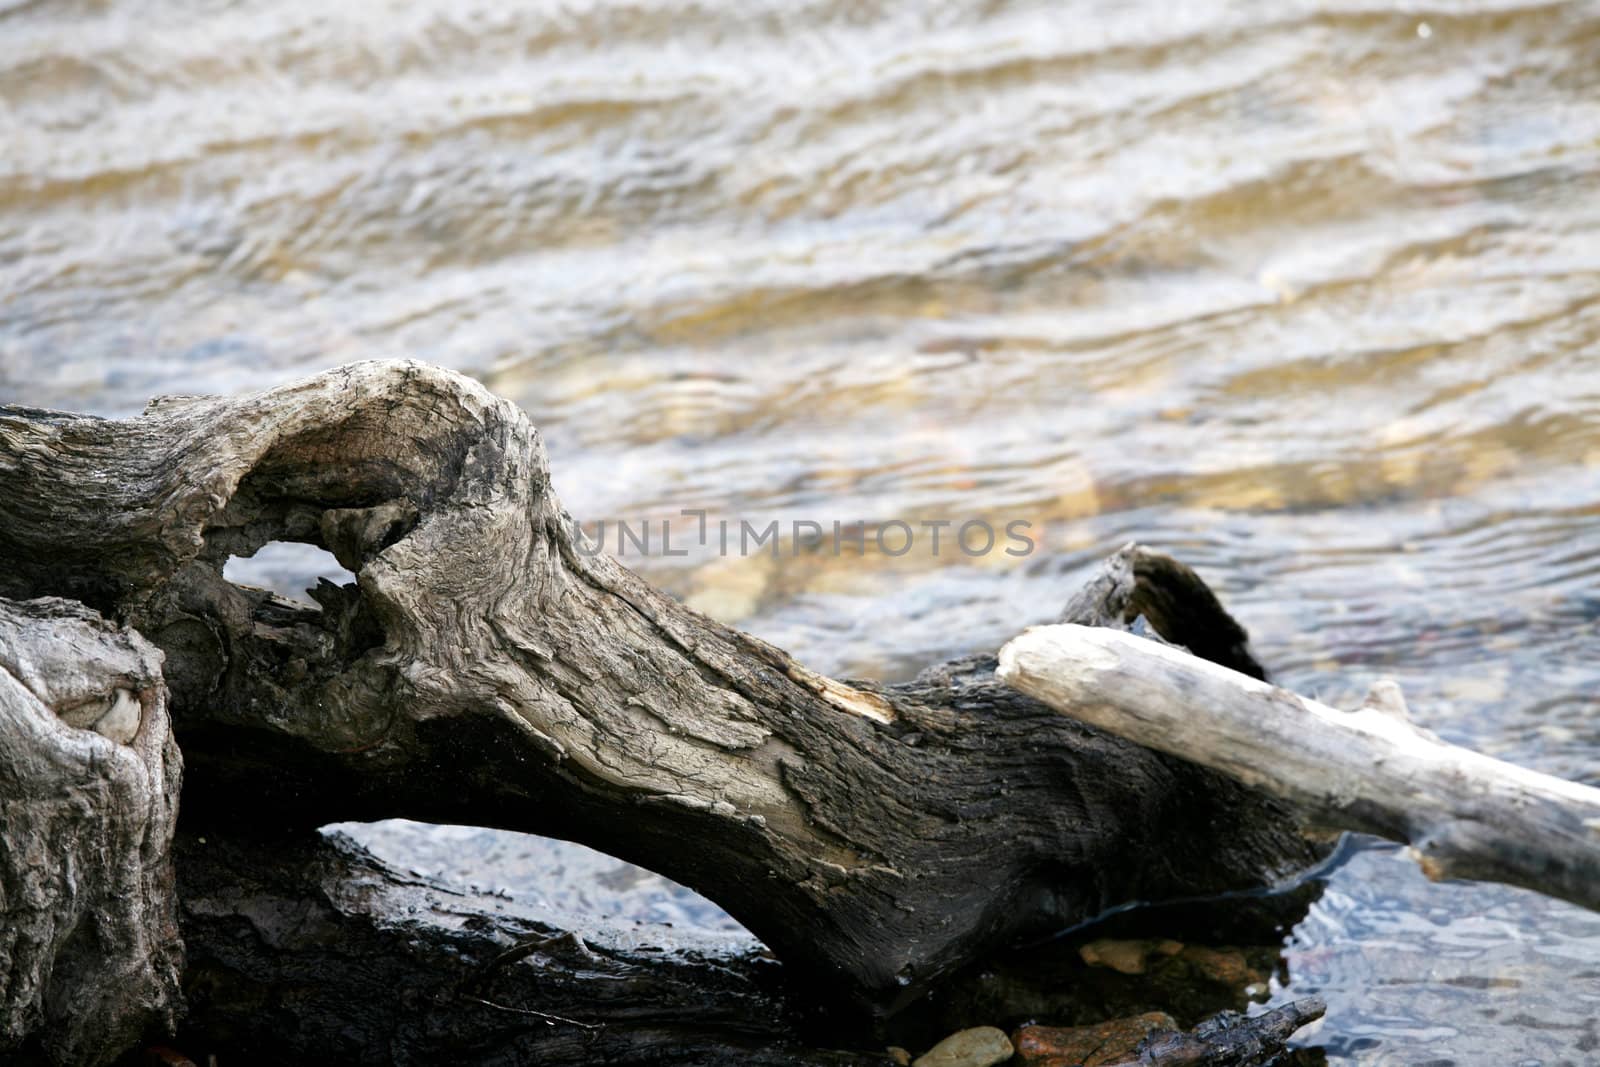 Fallen twisted log on edge of river